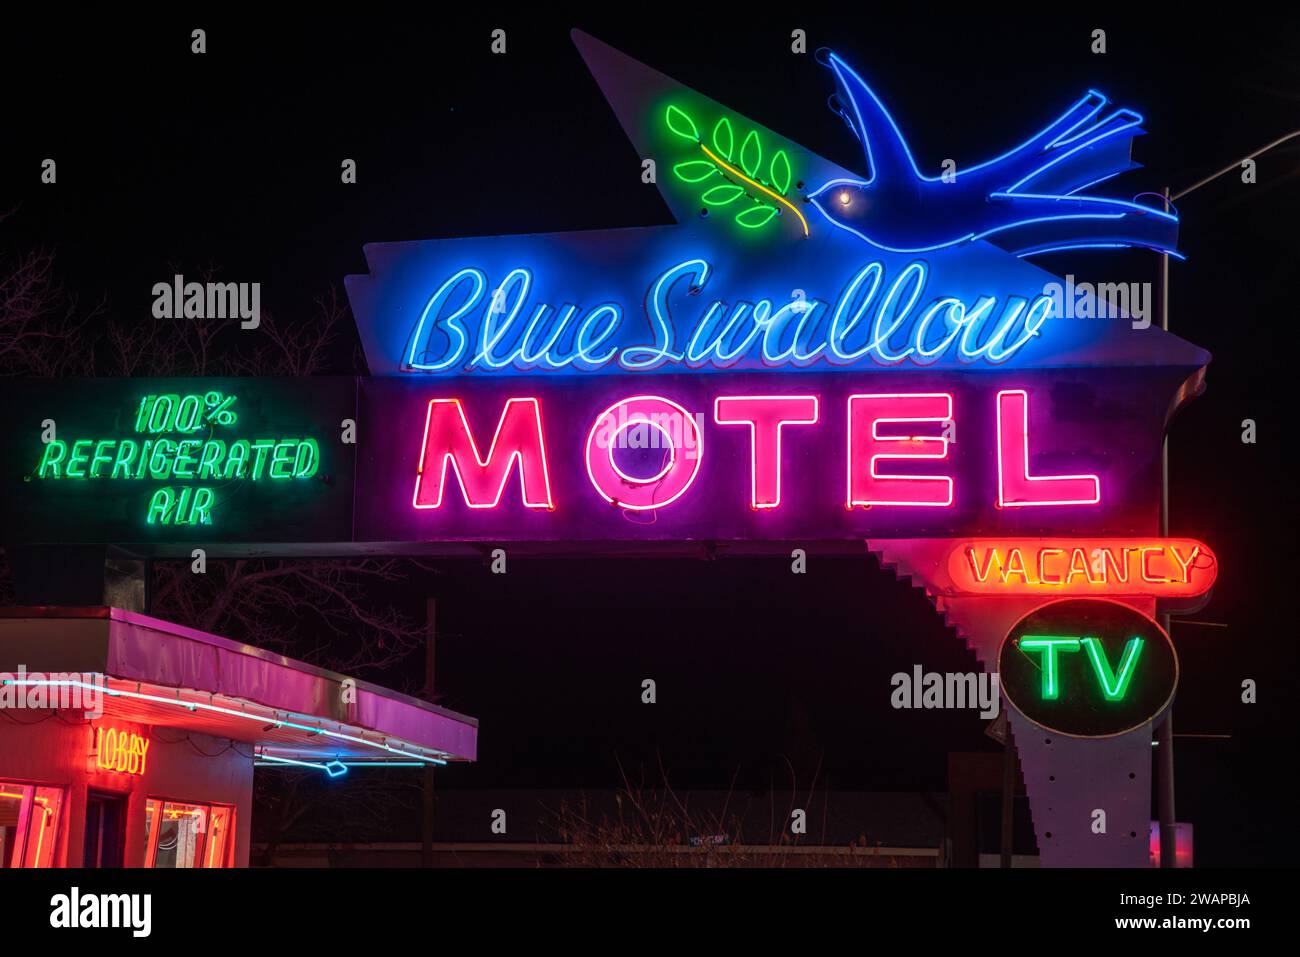 Closeup of lit colorful neon sign on Route 66 for Blue Swallow Motel, advertising vacancy and 100% refrigerated air, Tucumcari, New Mexico, USA. Stock Photo